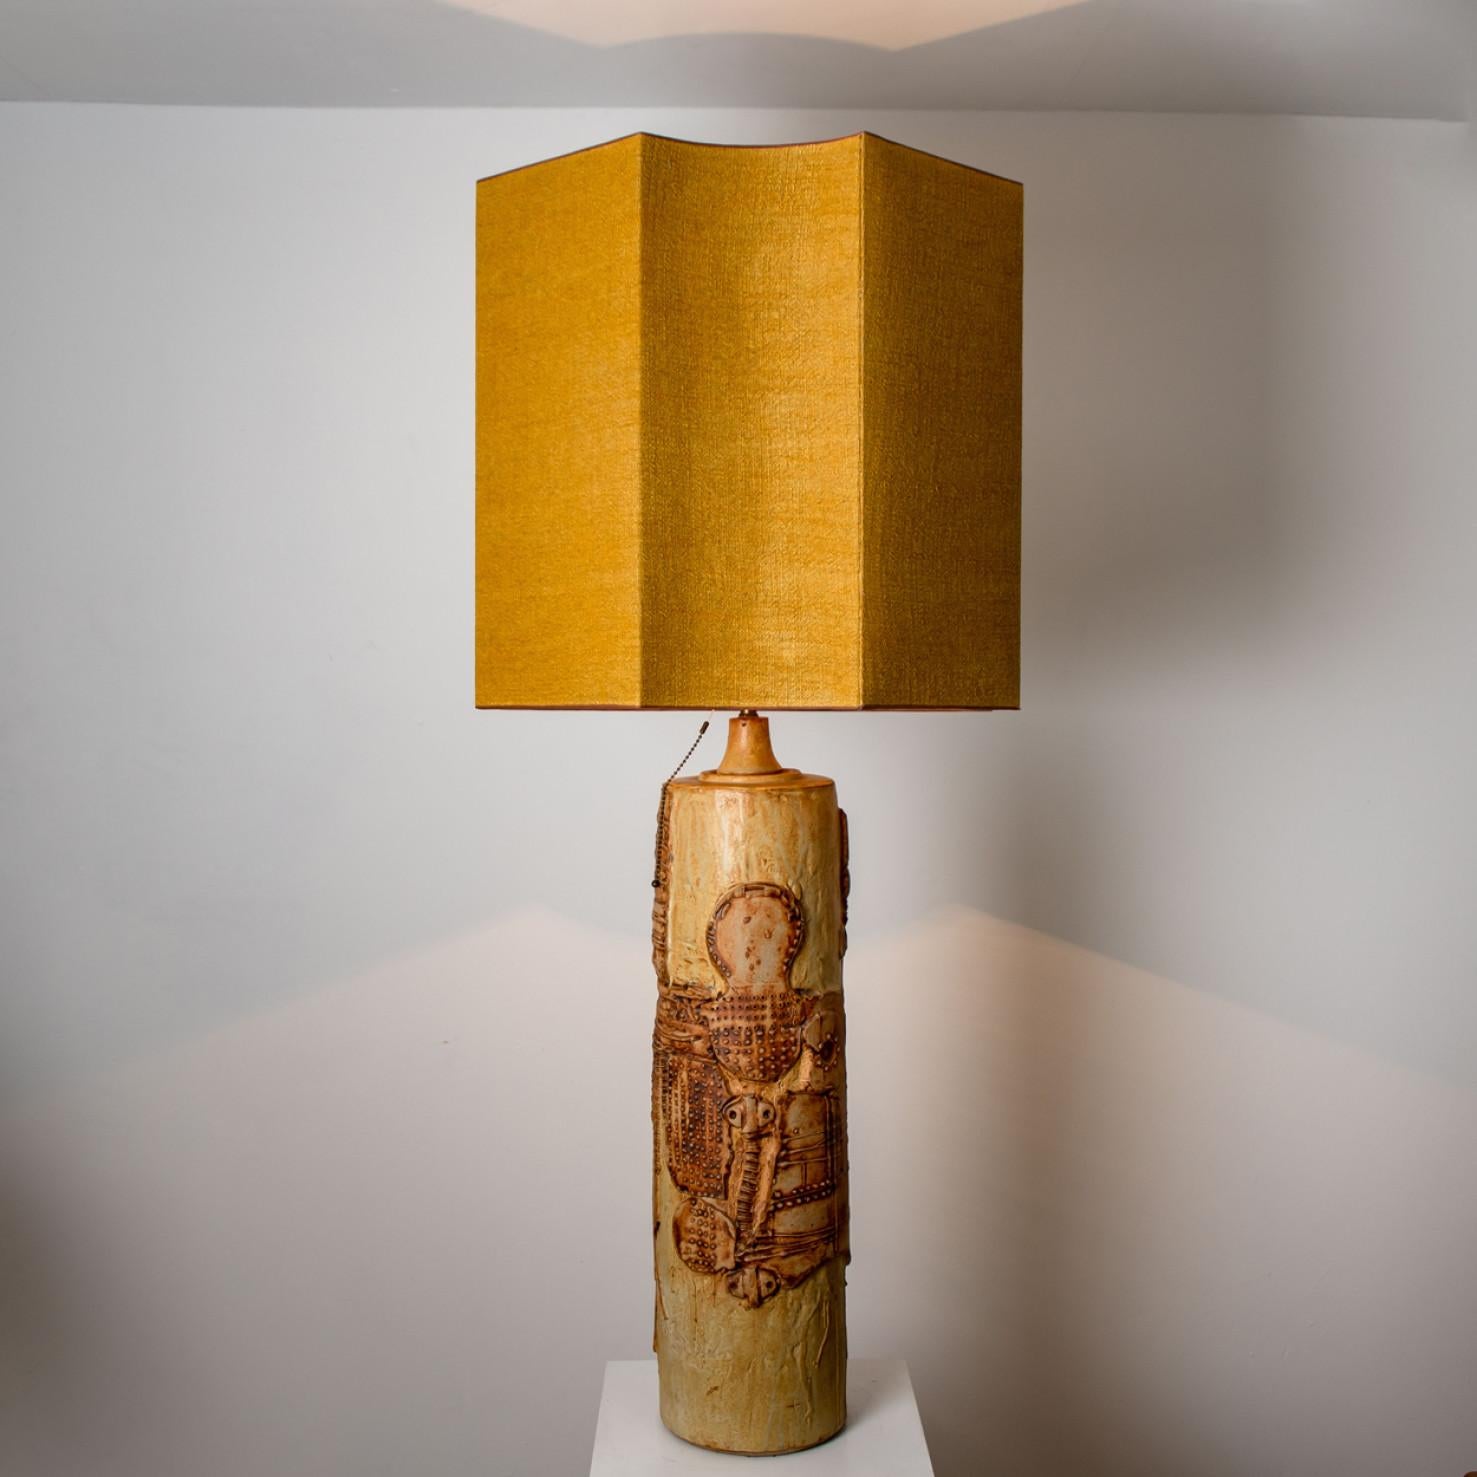 Large B. Rooke Ceramic Lamp, 1960s with Custom Made Silk Lampshade by René Hoube For Sale 5